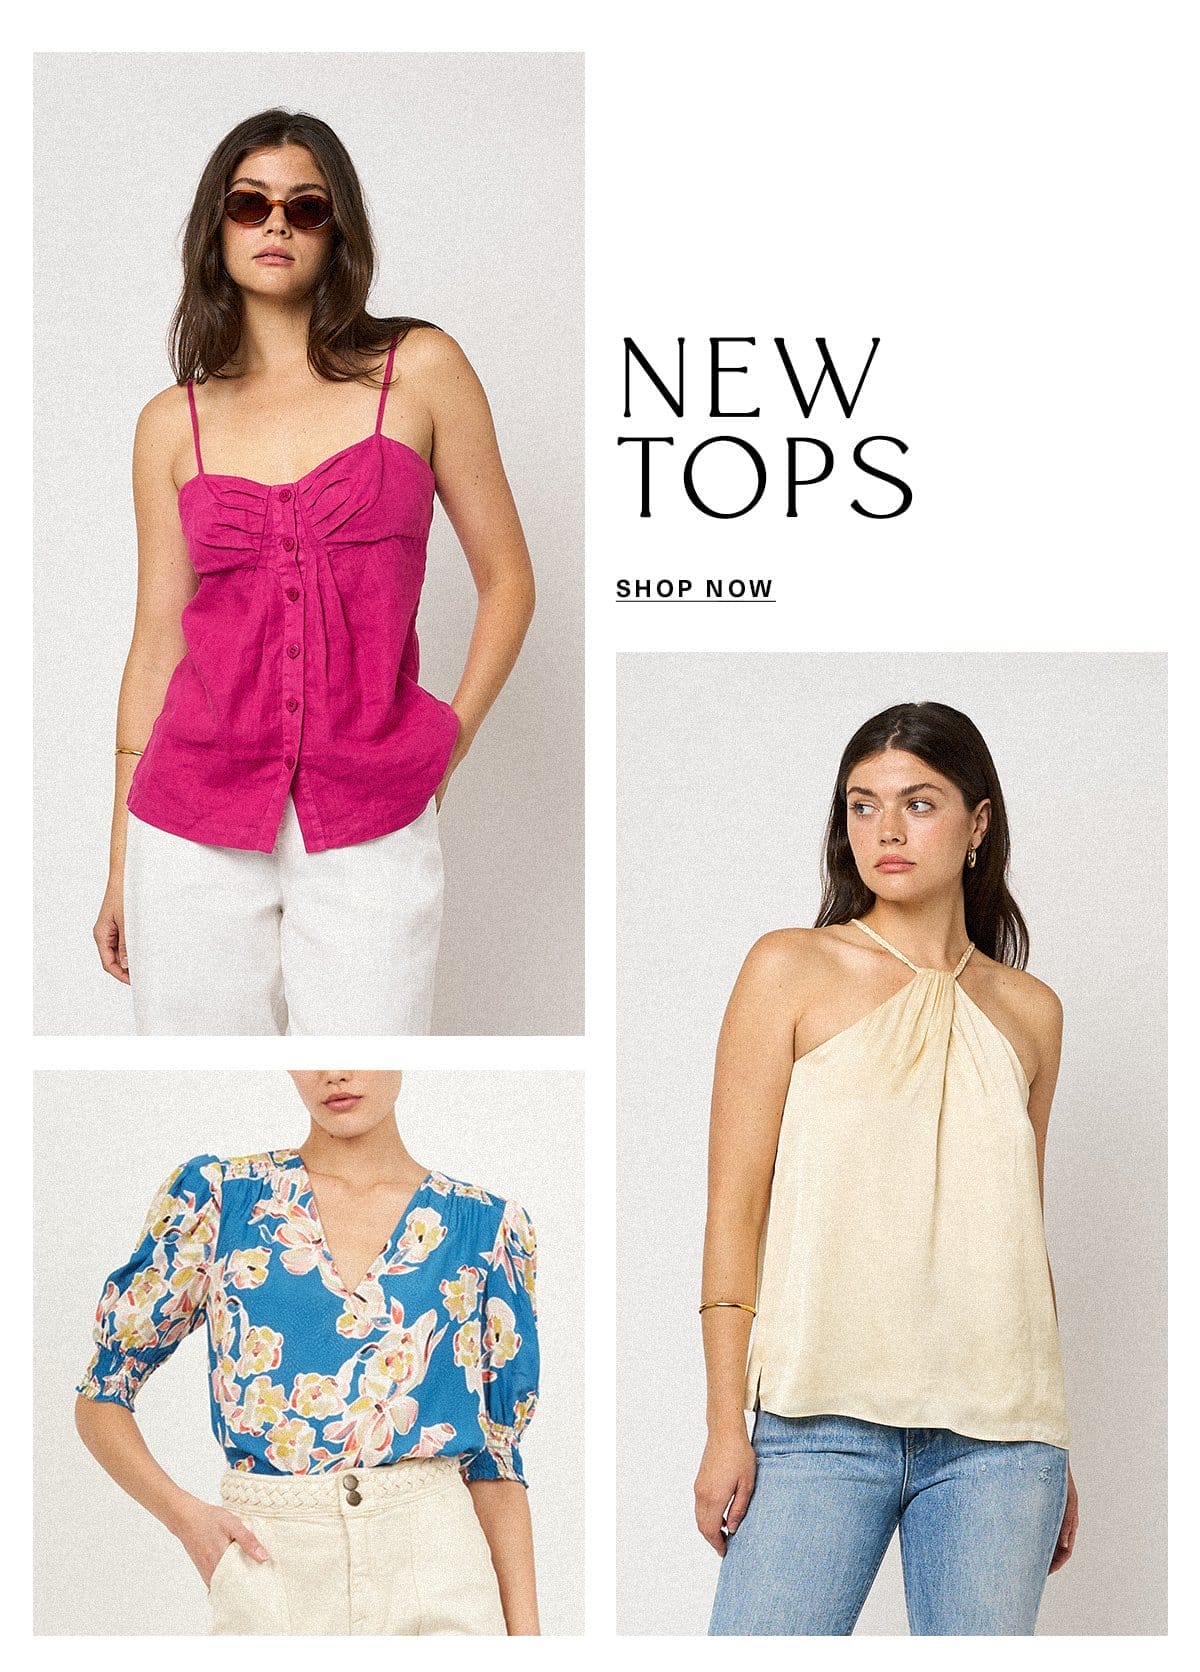 NEW TOPS SHOP NOW